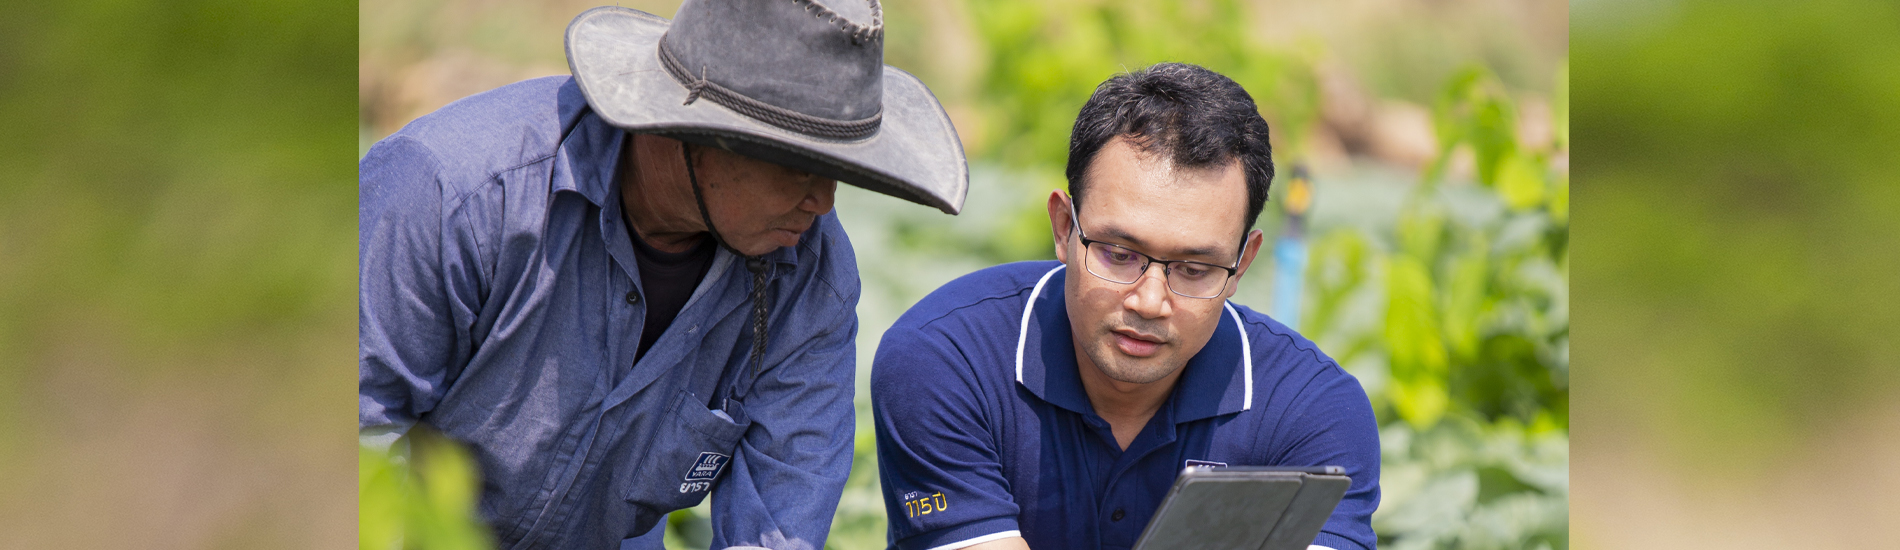 Yara is far more prevalent in Thailand than people realise. From the country’s sprawling farmlands to the digital shelves of e-commerce, its product and impact can be felt just about everywhere. Yara’s contributions extend beyond their fertiliser. They understand farmers' sensitivities, build physical presence and relationships.